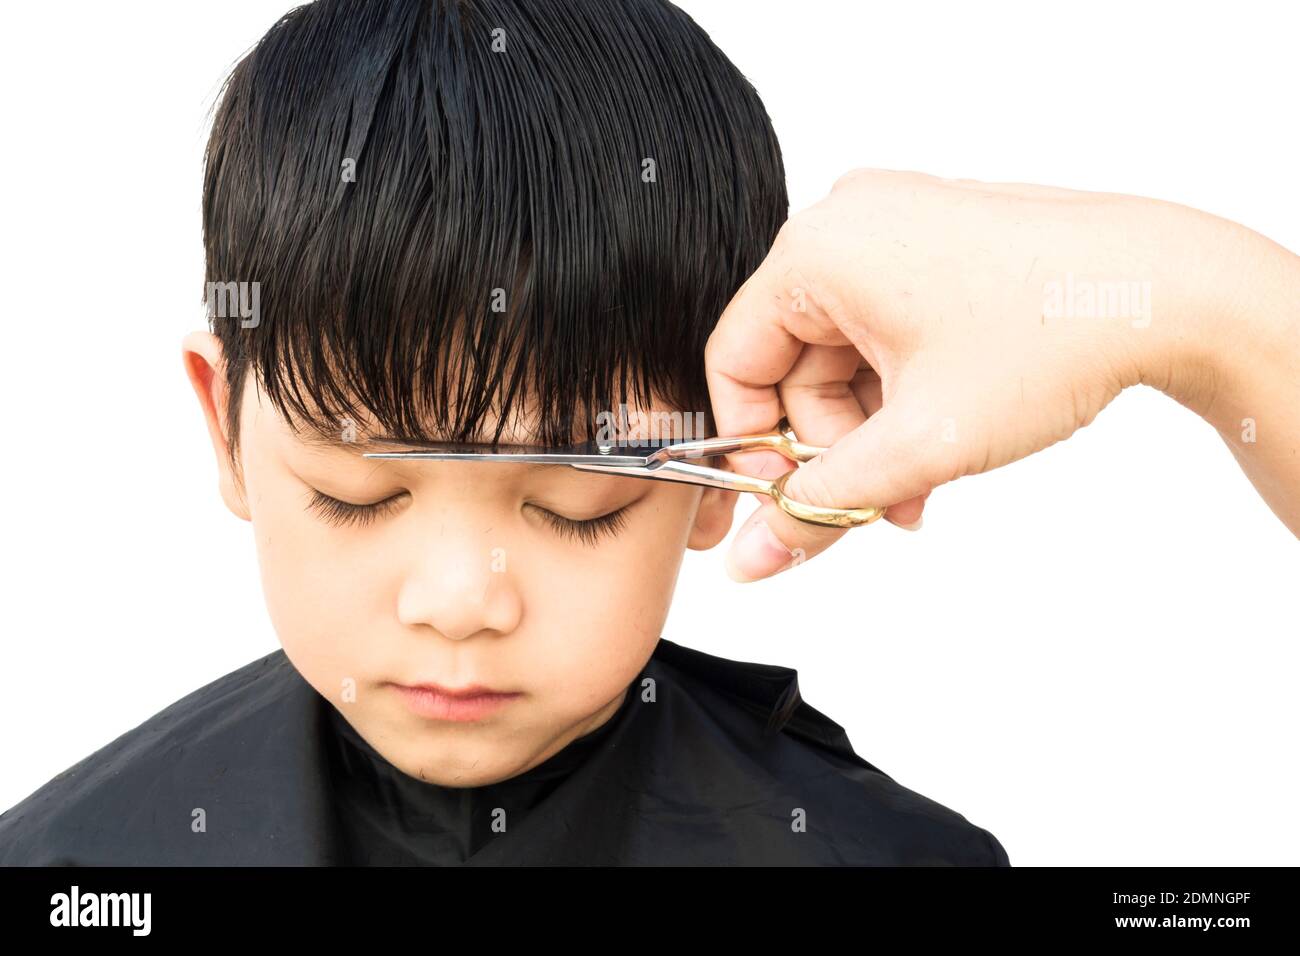 Cropped Hands Of Person Cutting Hair Against White Background Stock Photo -  Alamy